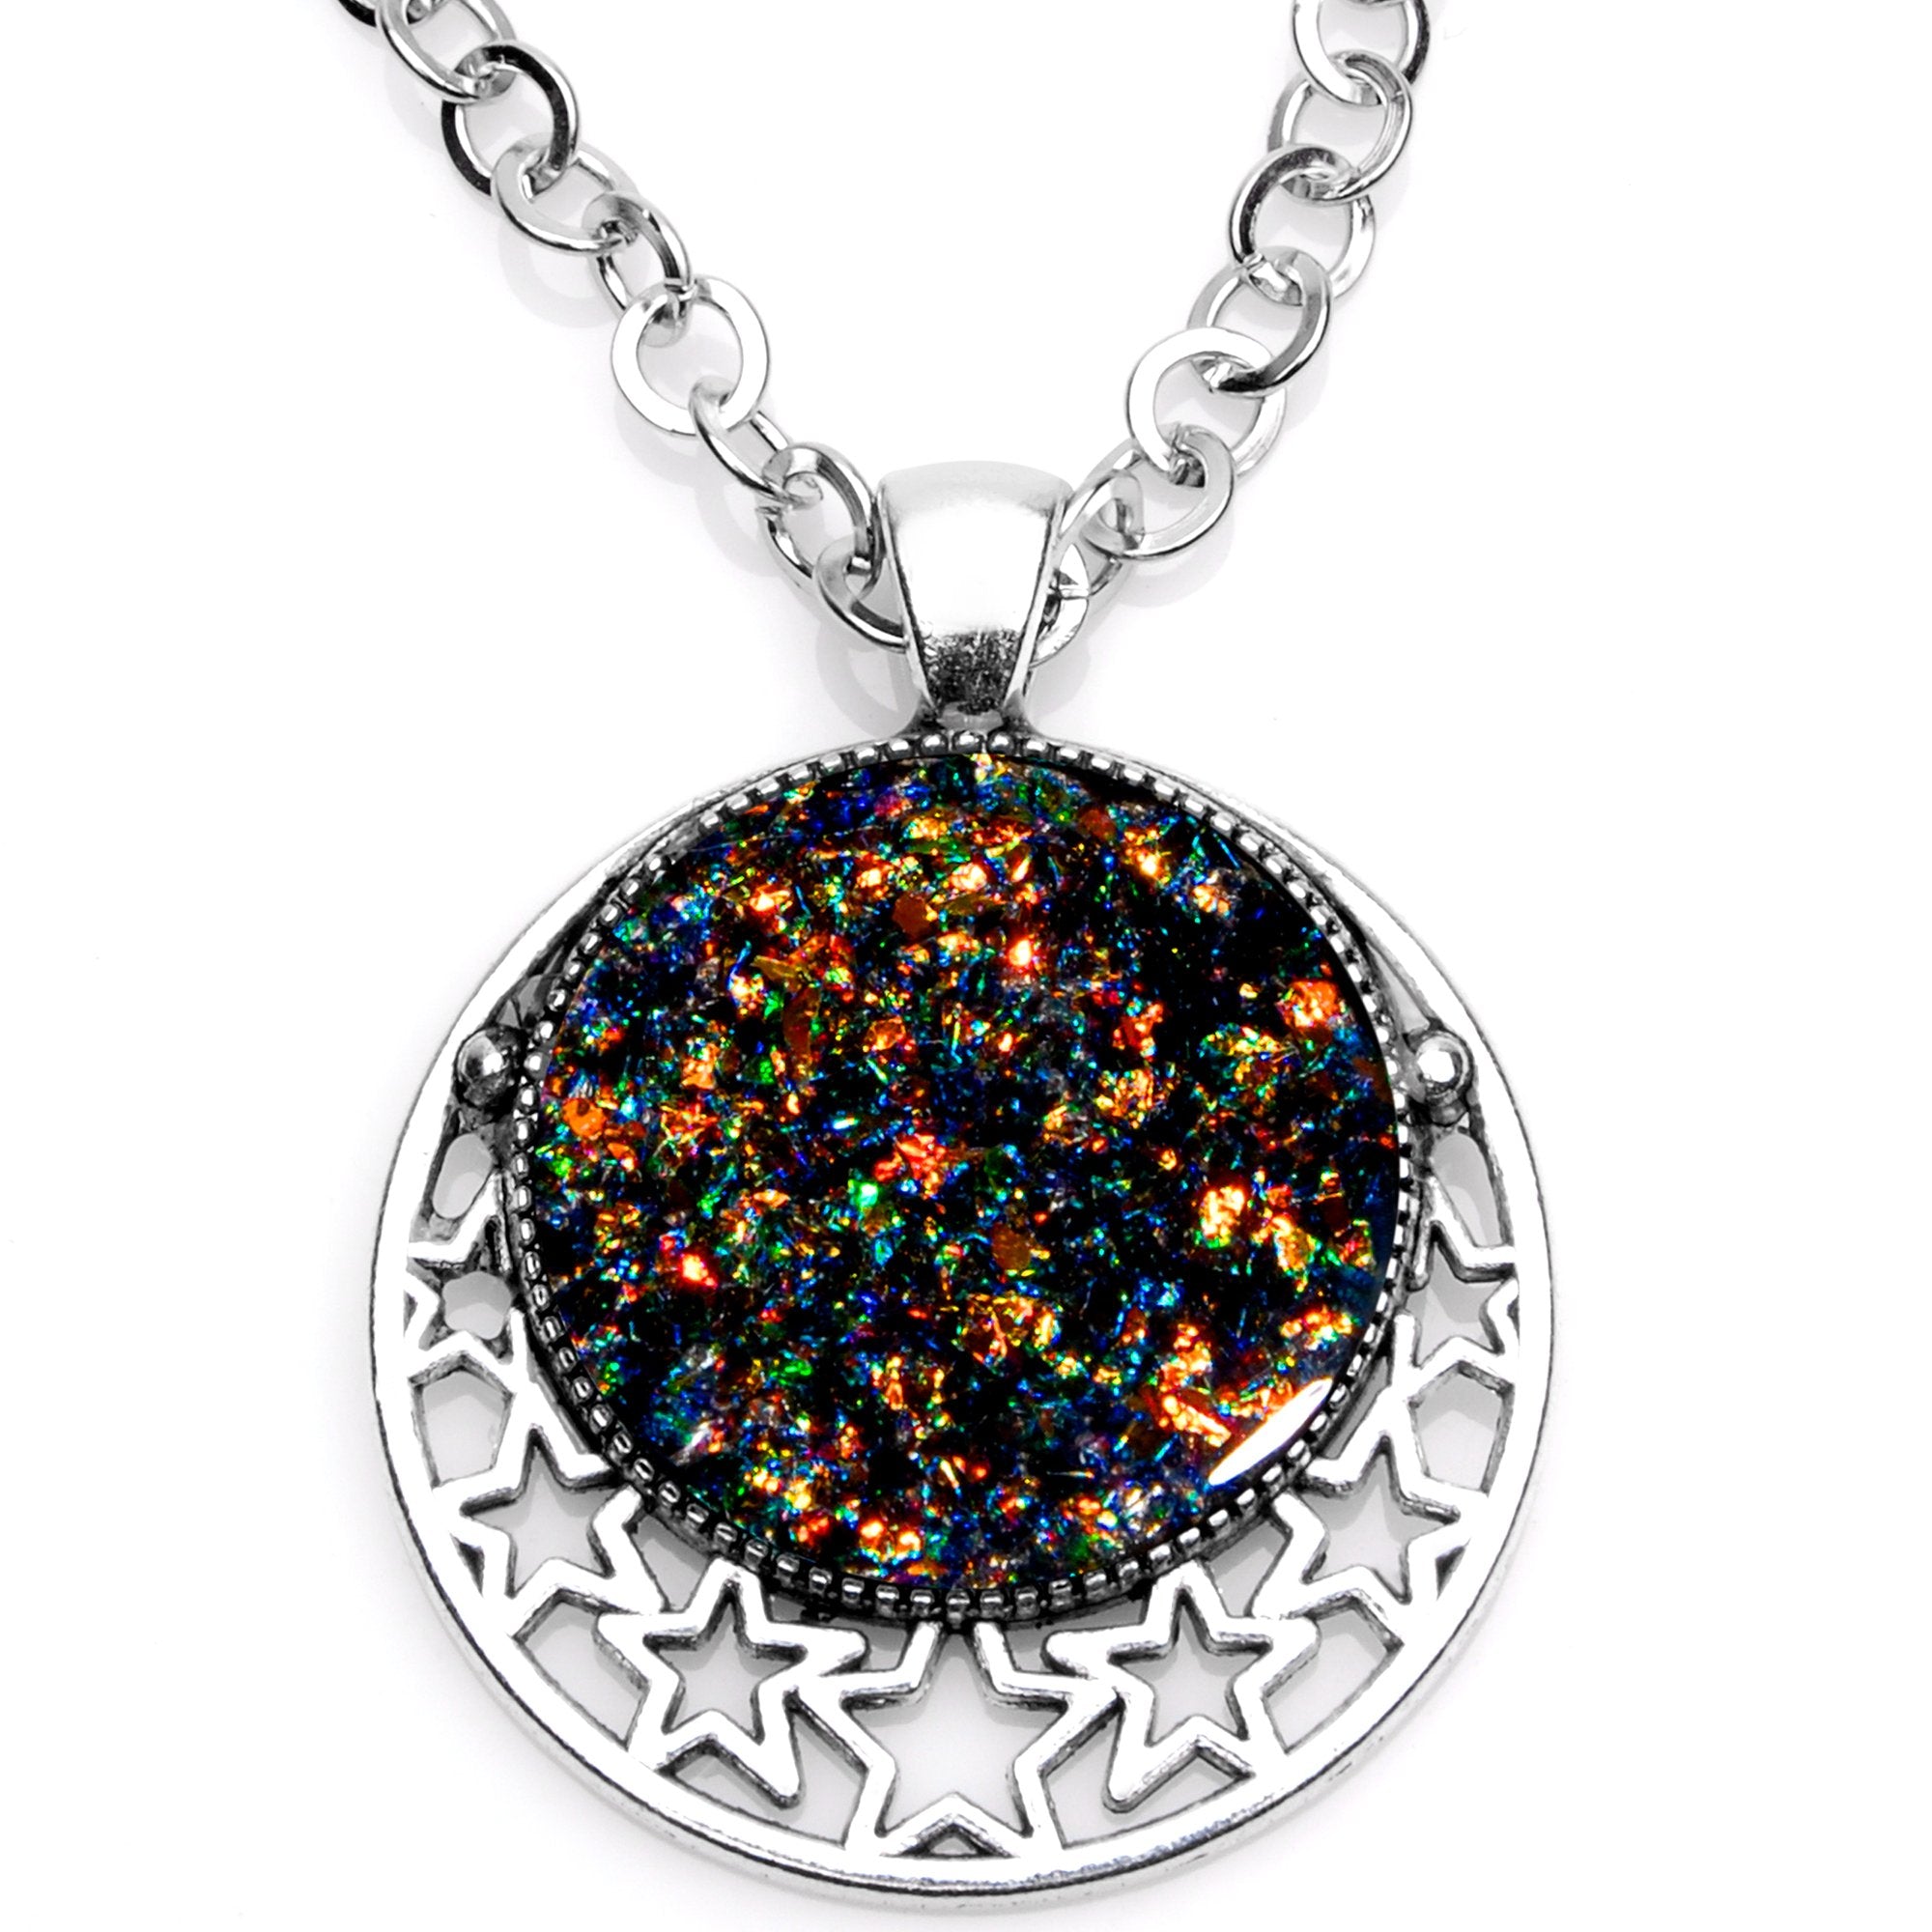 Handmade Black Faux Opal Starry Universe Silver Plated Chain Necklace